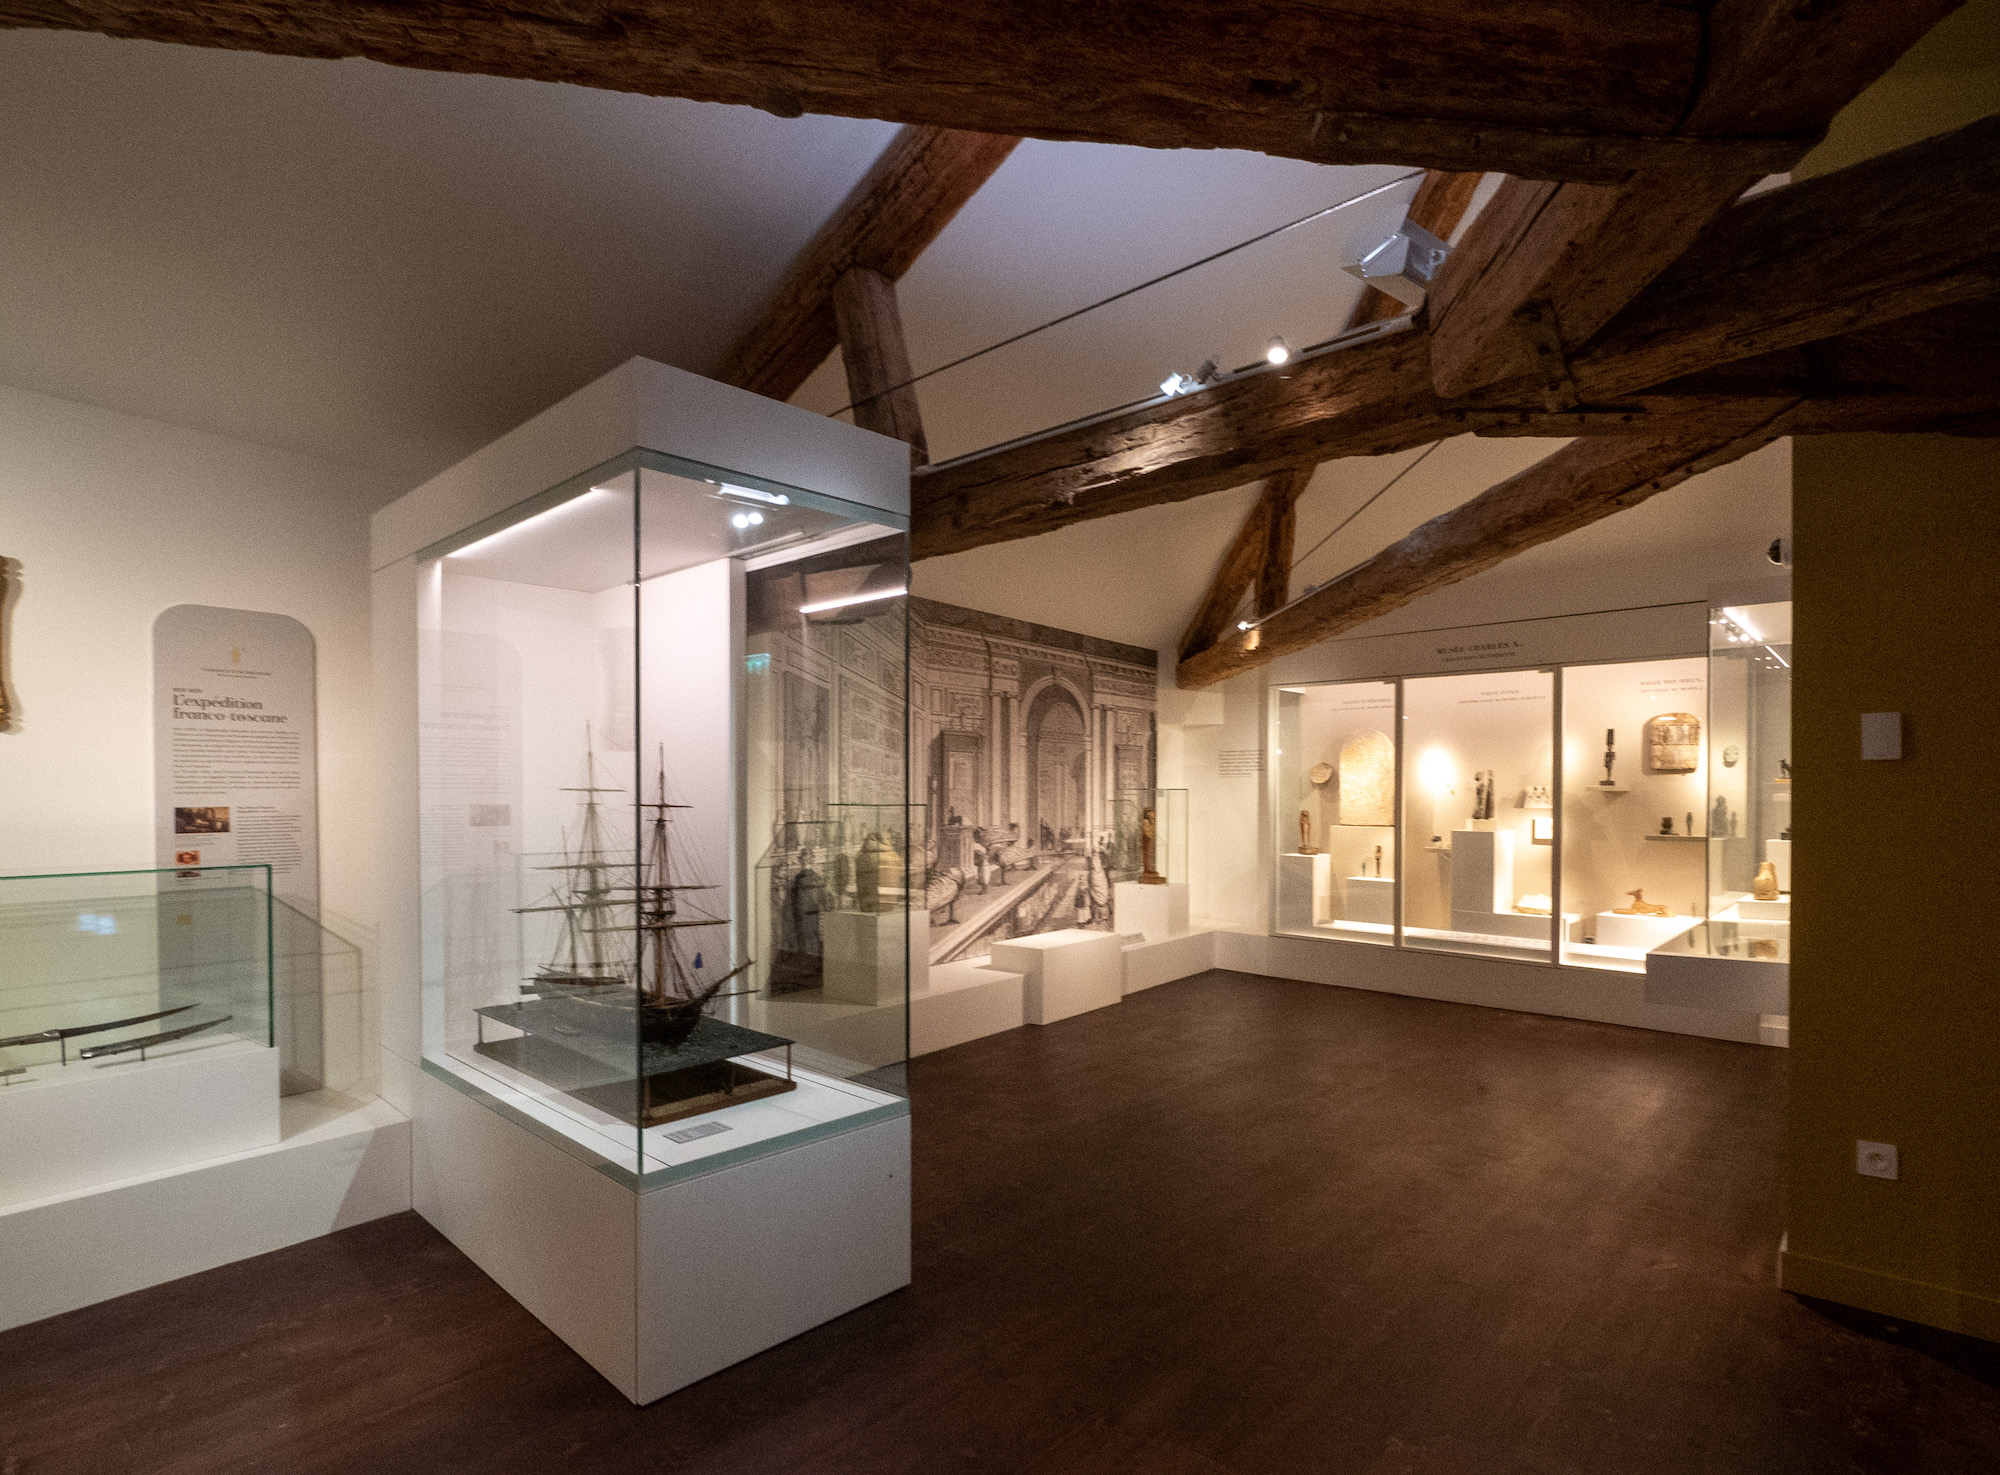 1681345854 502 The Champollion Museum in Vif miss pandora - The Champollion Museum in Vif